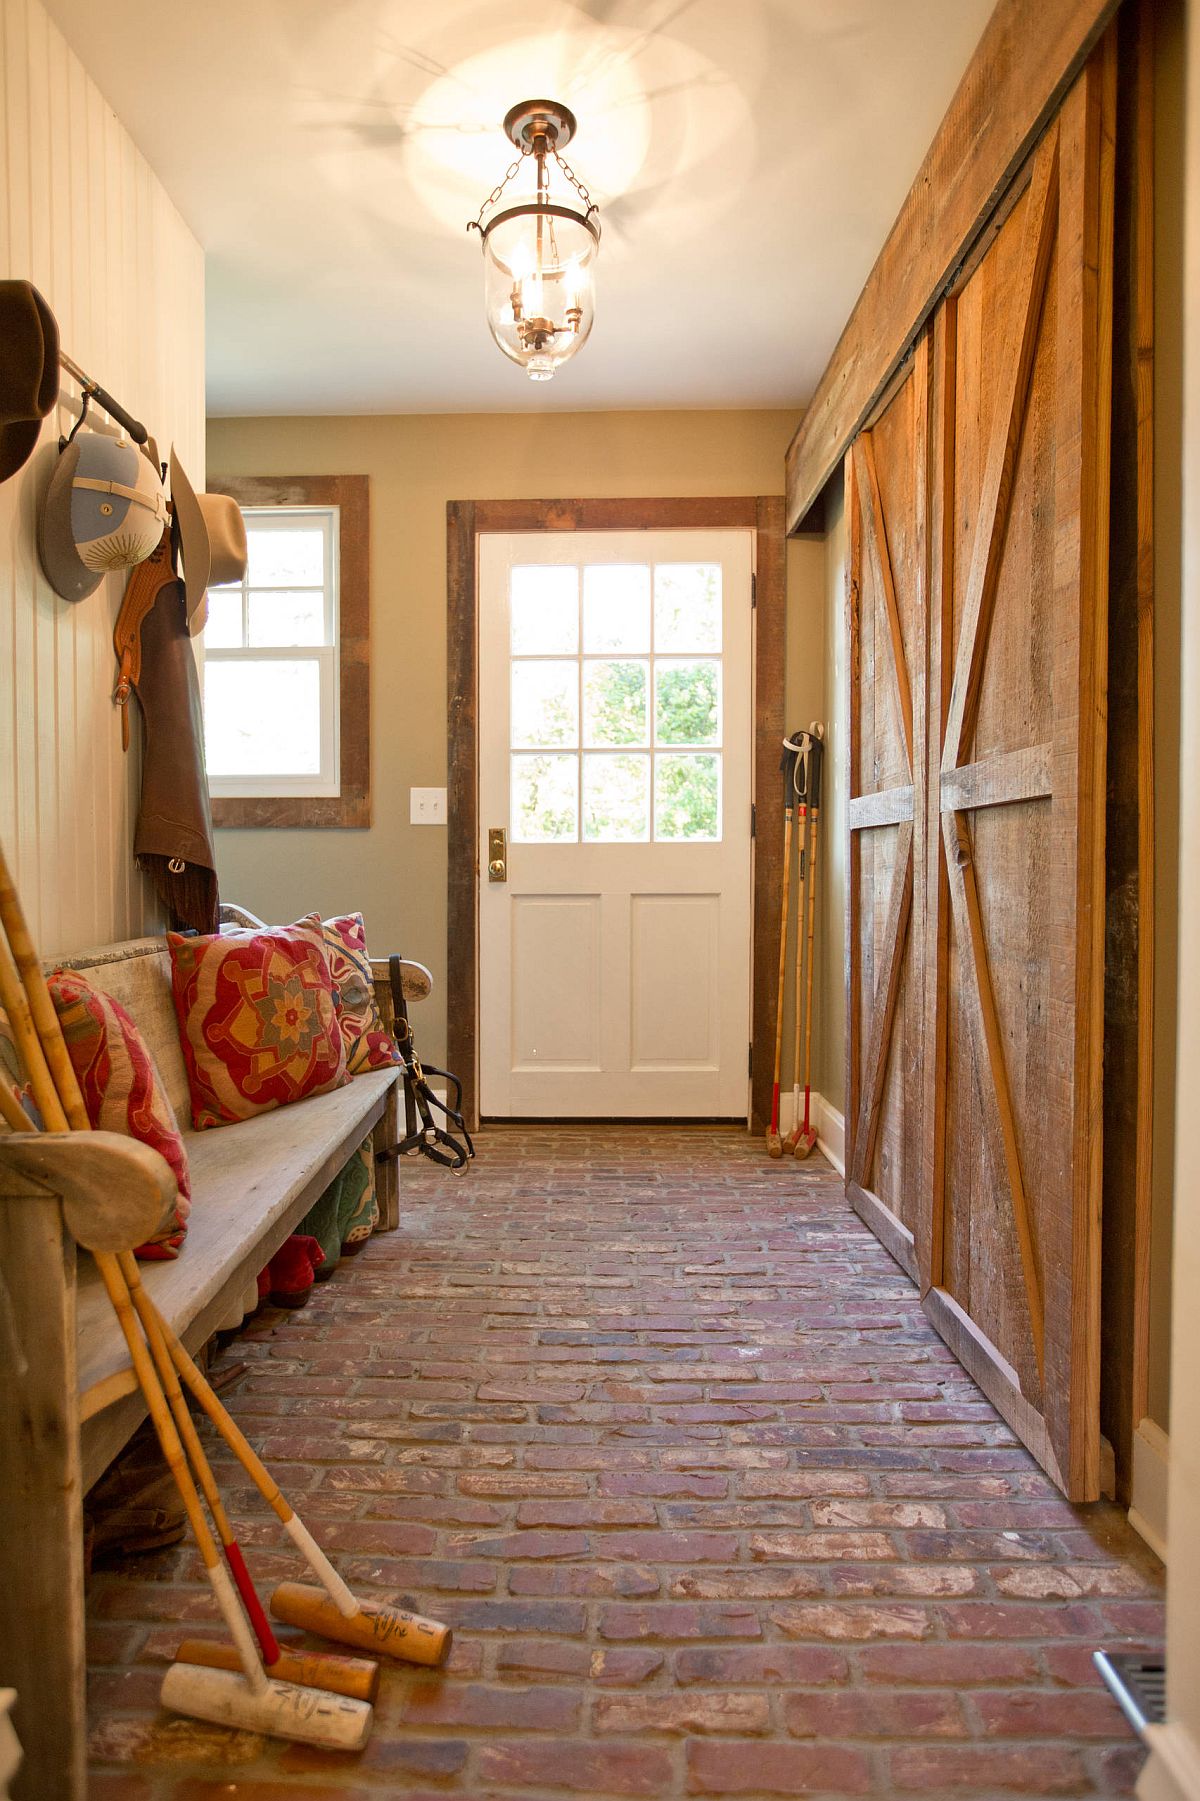 Red-brick-floor-brings-a-hint-of-earthen-rustic-charm-to-any-entryway-it-adorns-88278